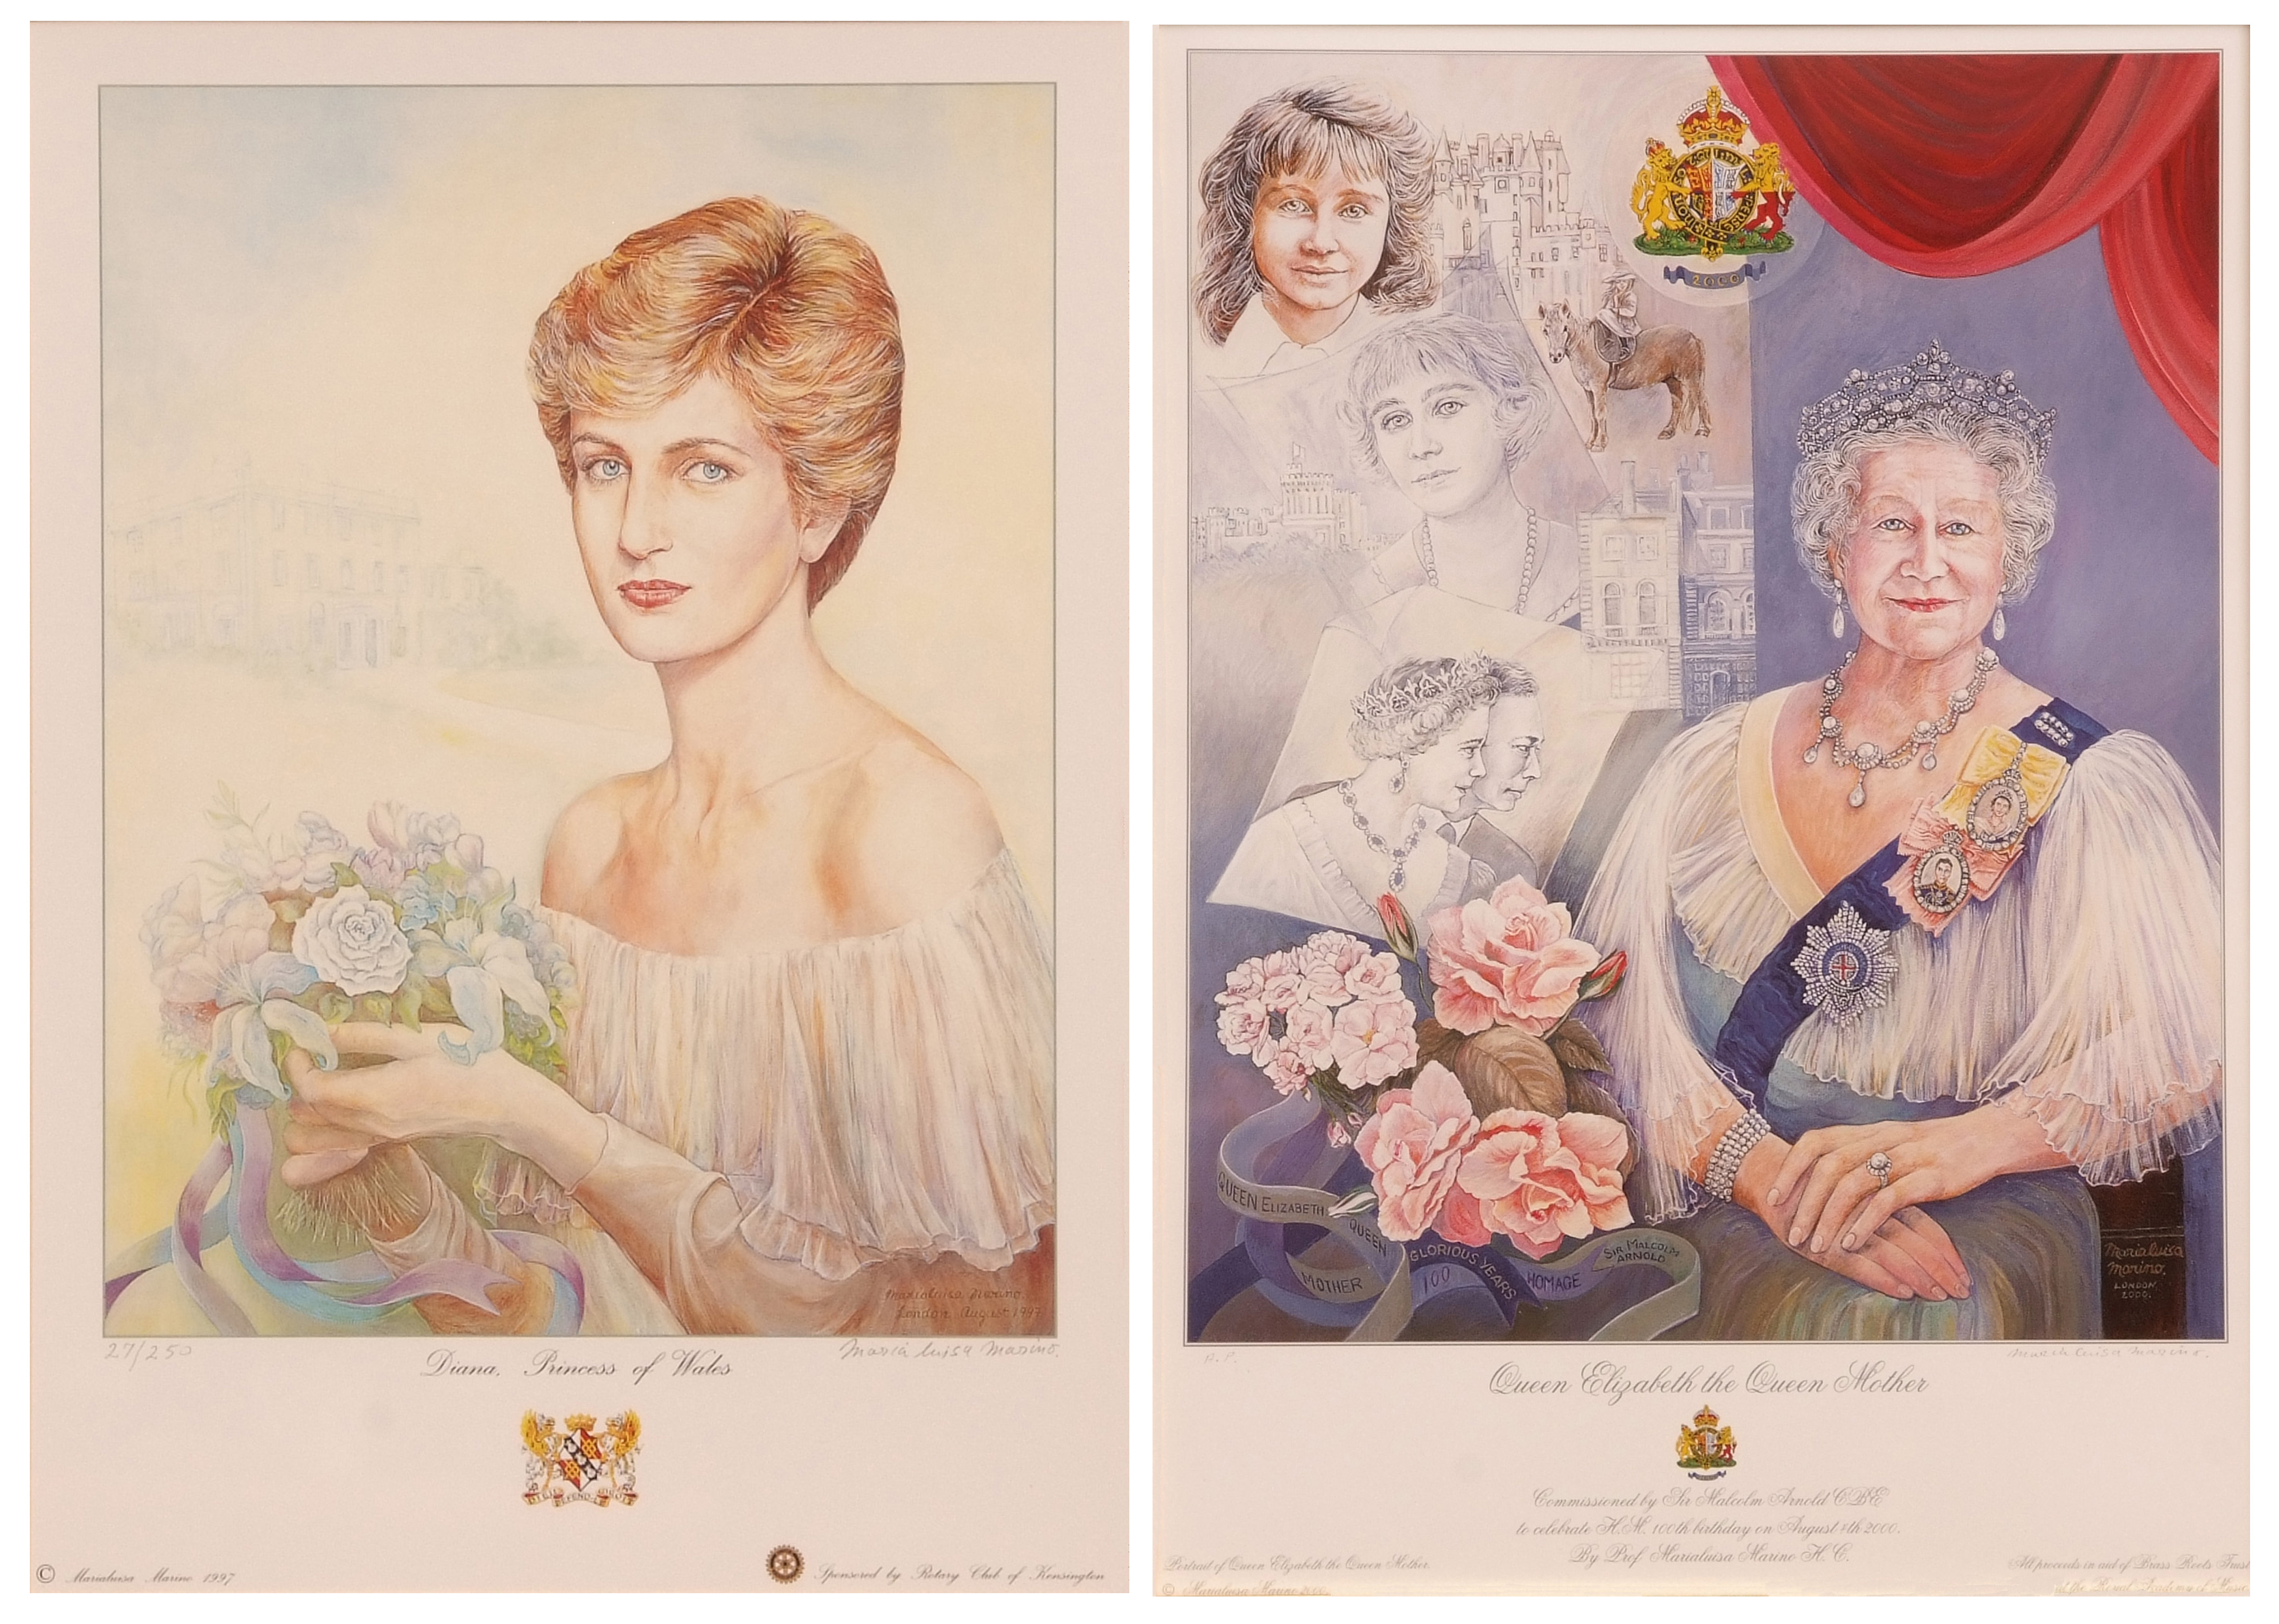 After Marioluisa Marino (20th Century Italian), Queen Elizabeth, The Queen Mother (commissioned by